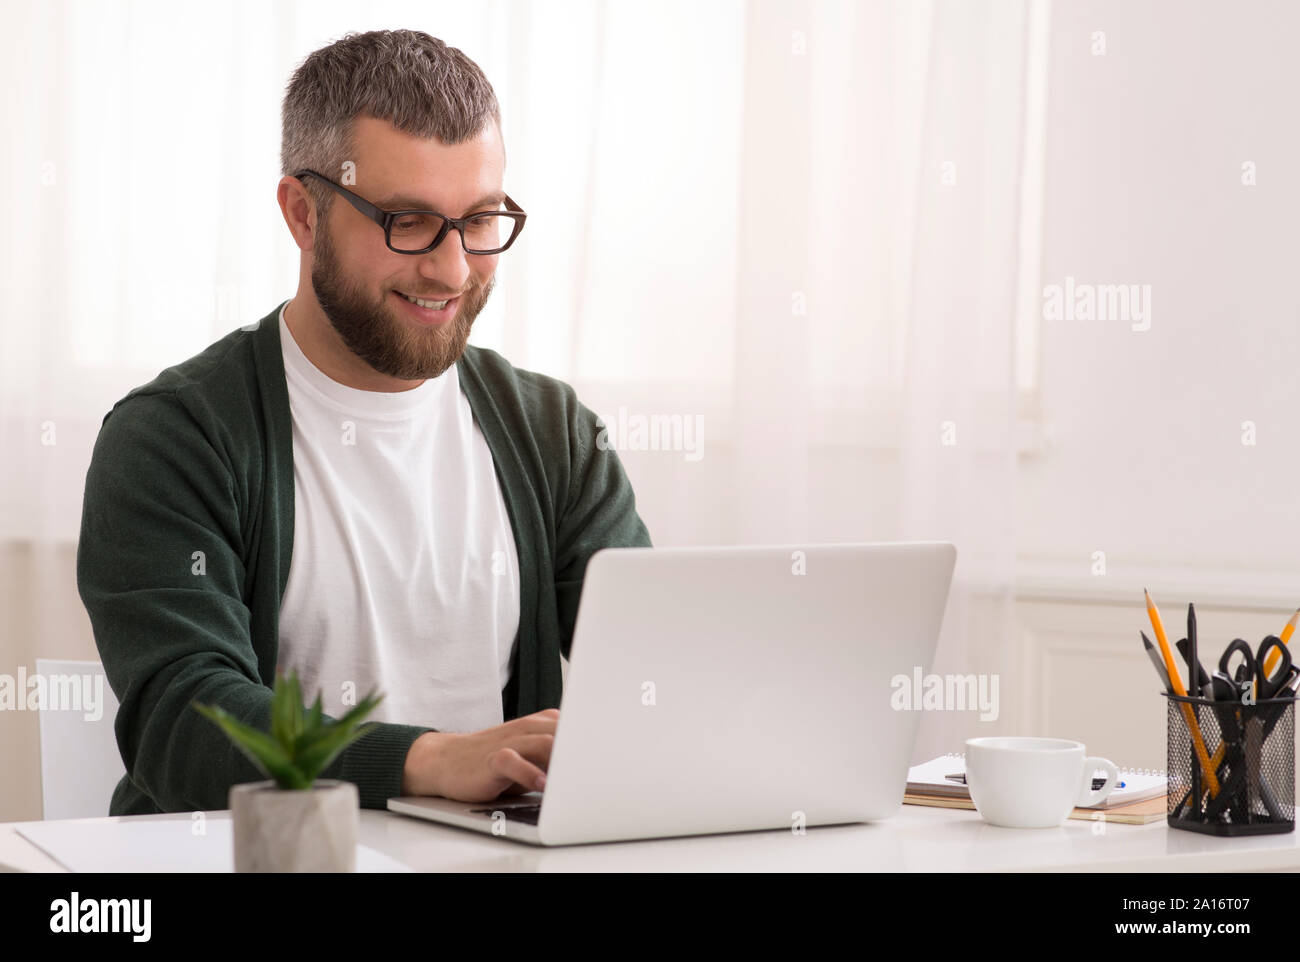 Middle aged man enjoying his job, working from home Stock Photo